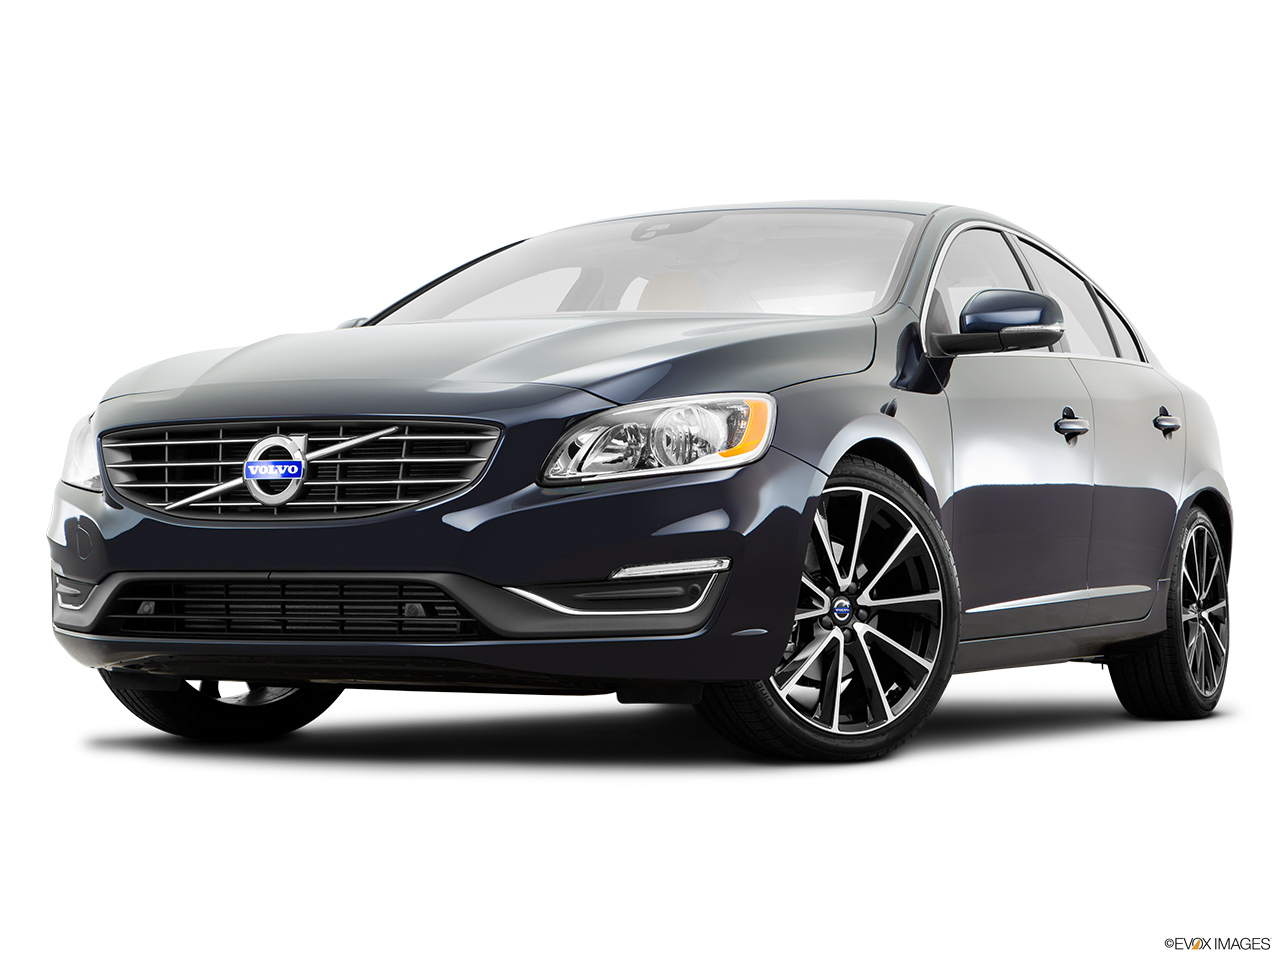 2016 Volvo S60 T5 Drive-E FWD Premier Front angle view, low wide perspective. 